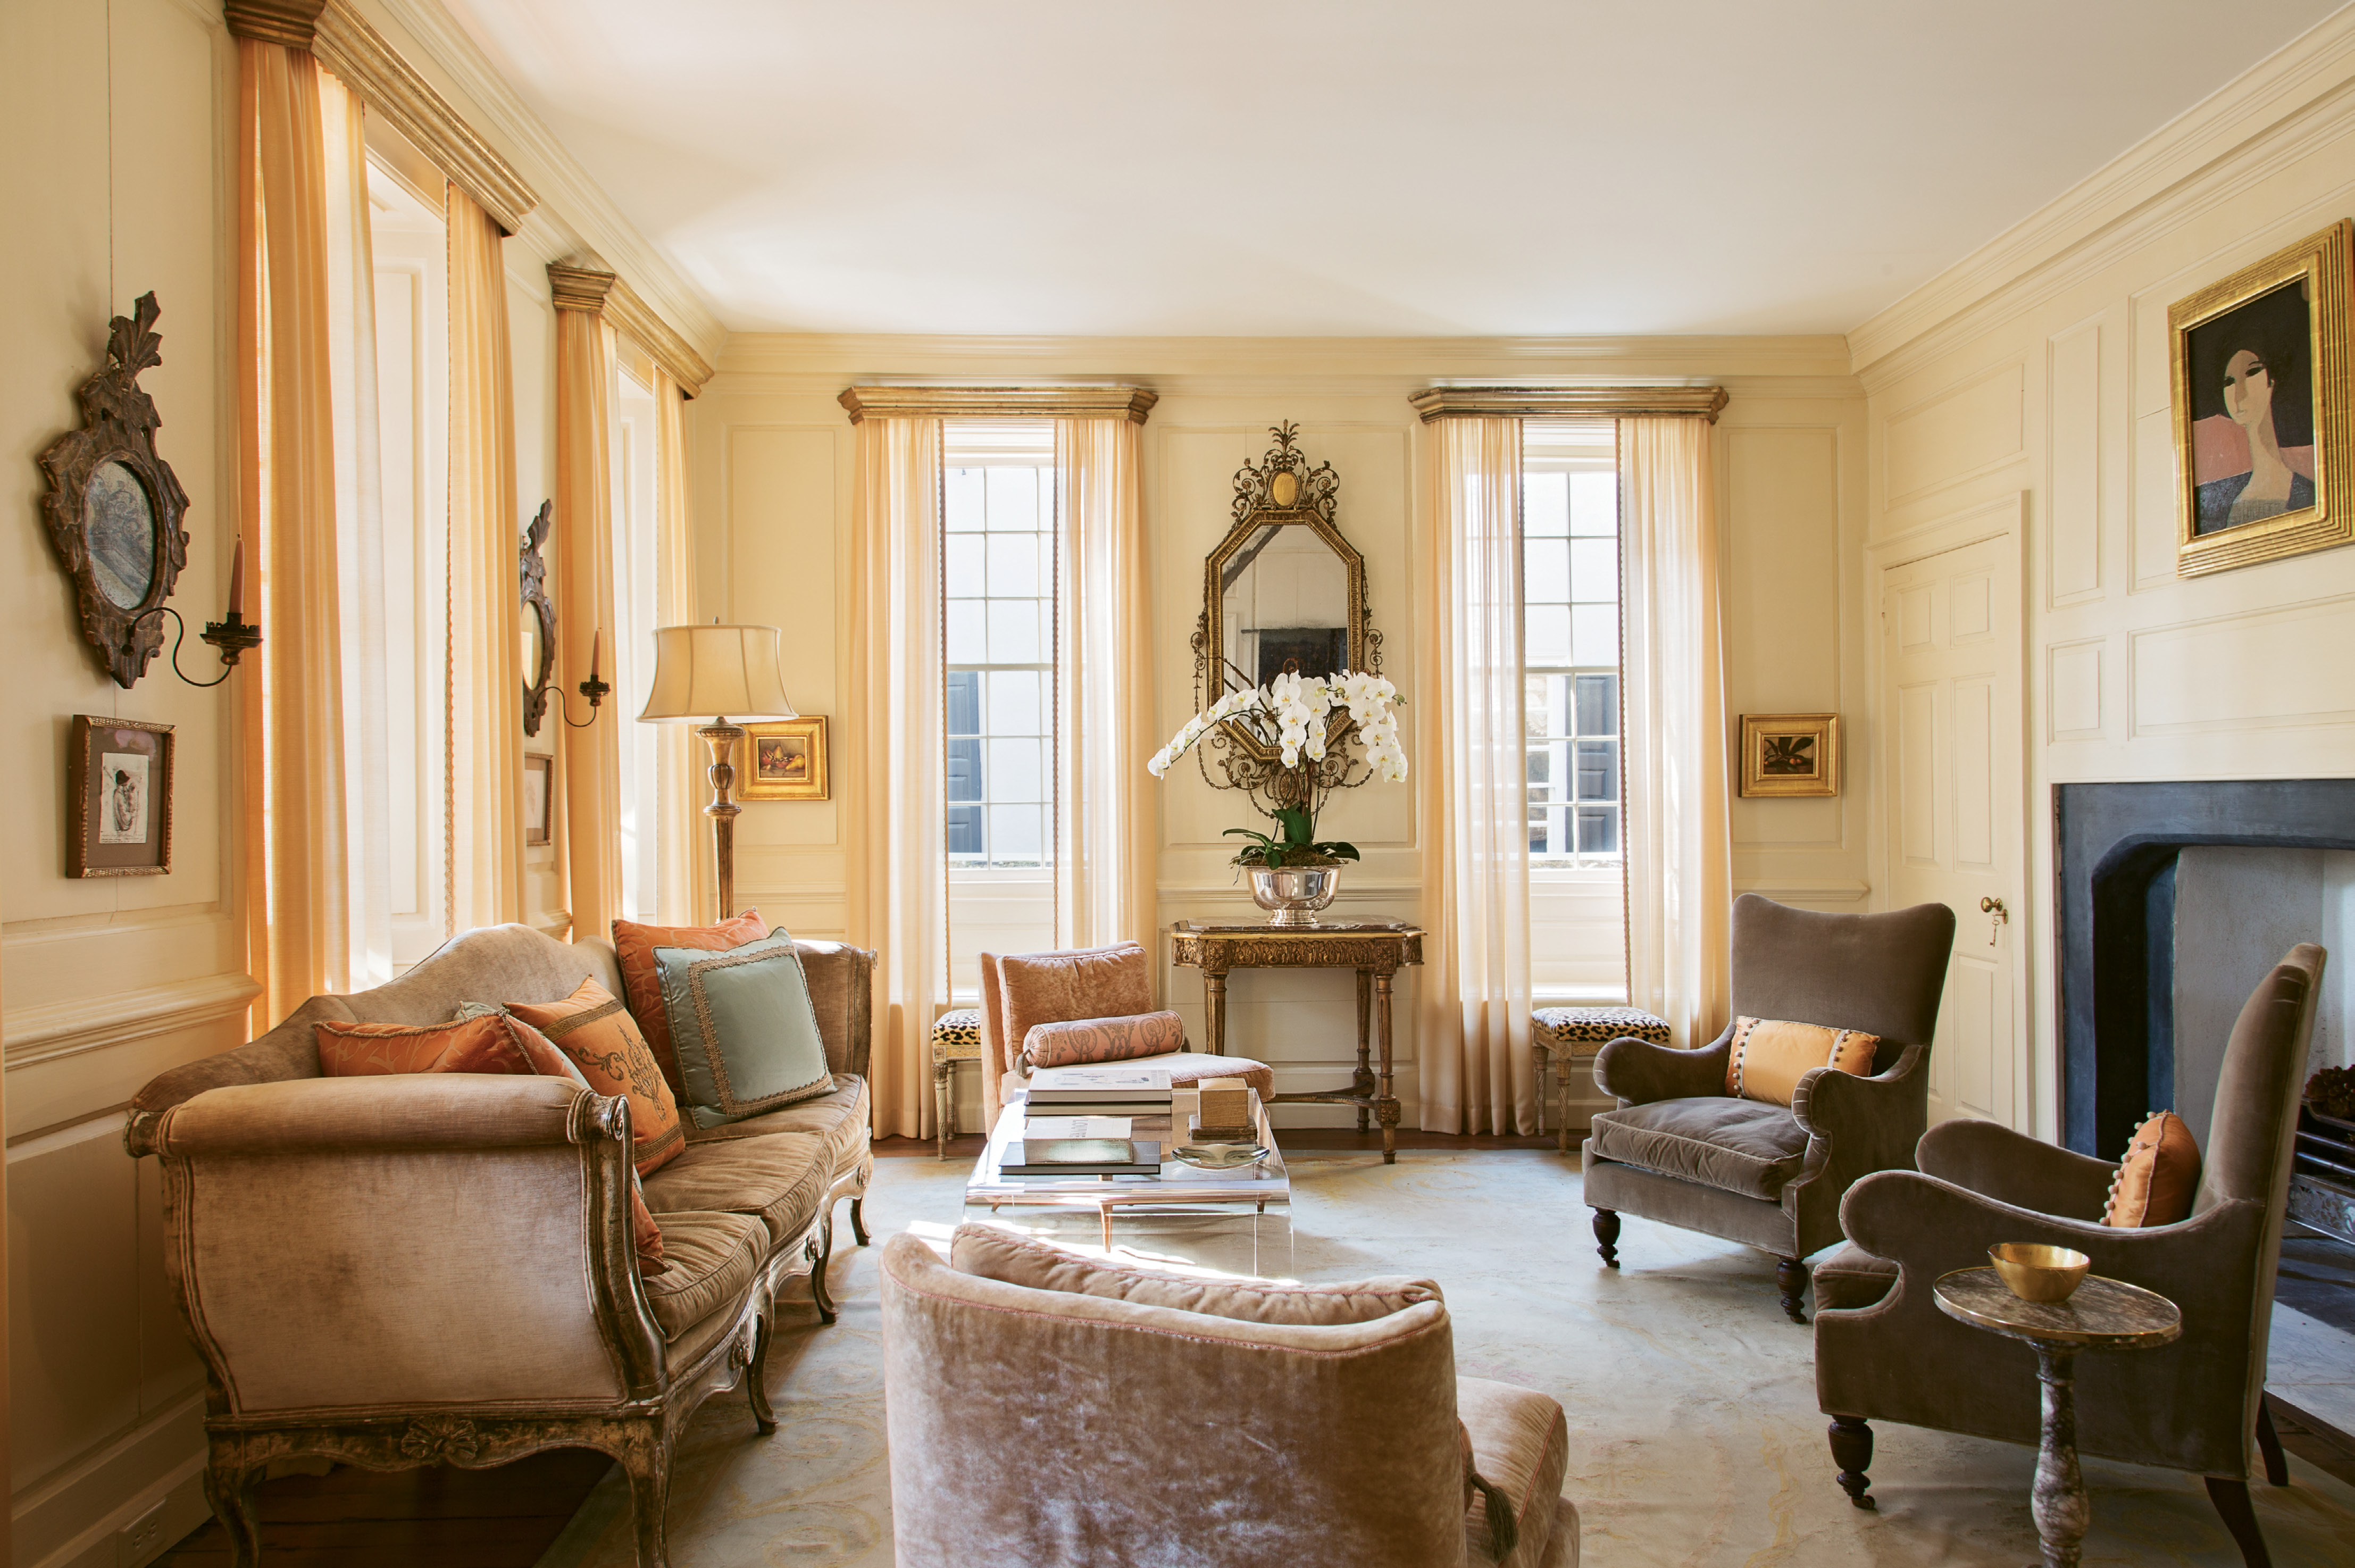 A 1968 portrait by French painter André Minaux sets the tone for the first-floor drawing room. “She has that little bit of pink,” says Ann. “We put her right over the classical Georgian fireplace and suddenly the room got very feminine.” Sketches by Ben Long and two still lifes by Jill Hooper round out the room’s luxe vibe.